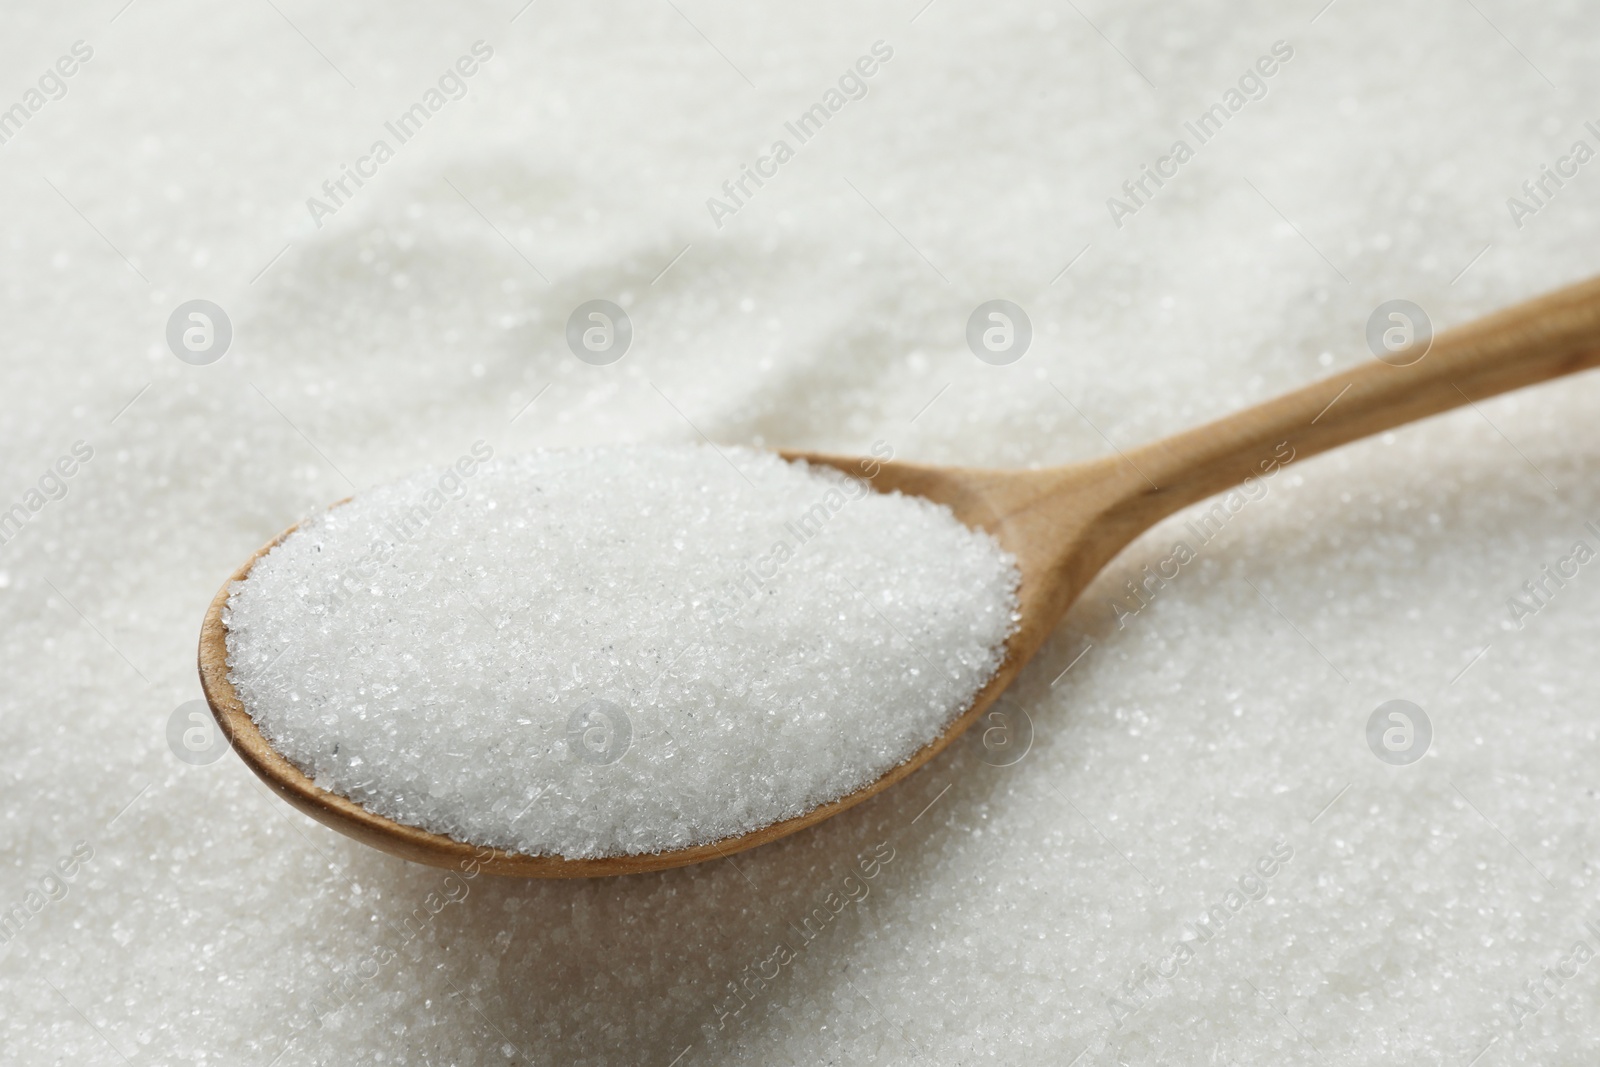 Photo of Wooden spoon on granulated sugar, closeup view